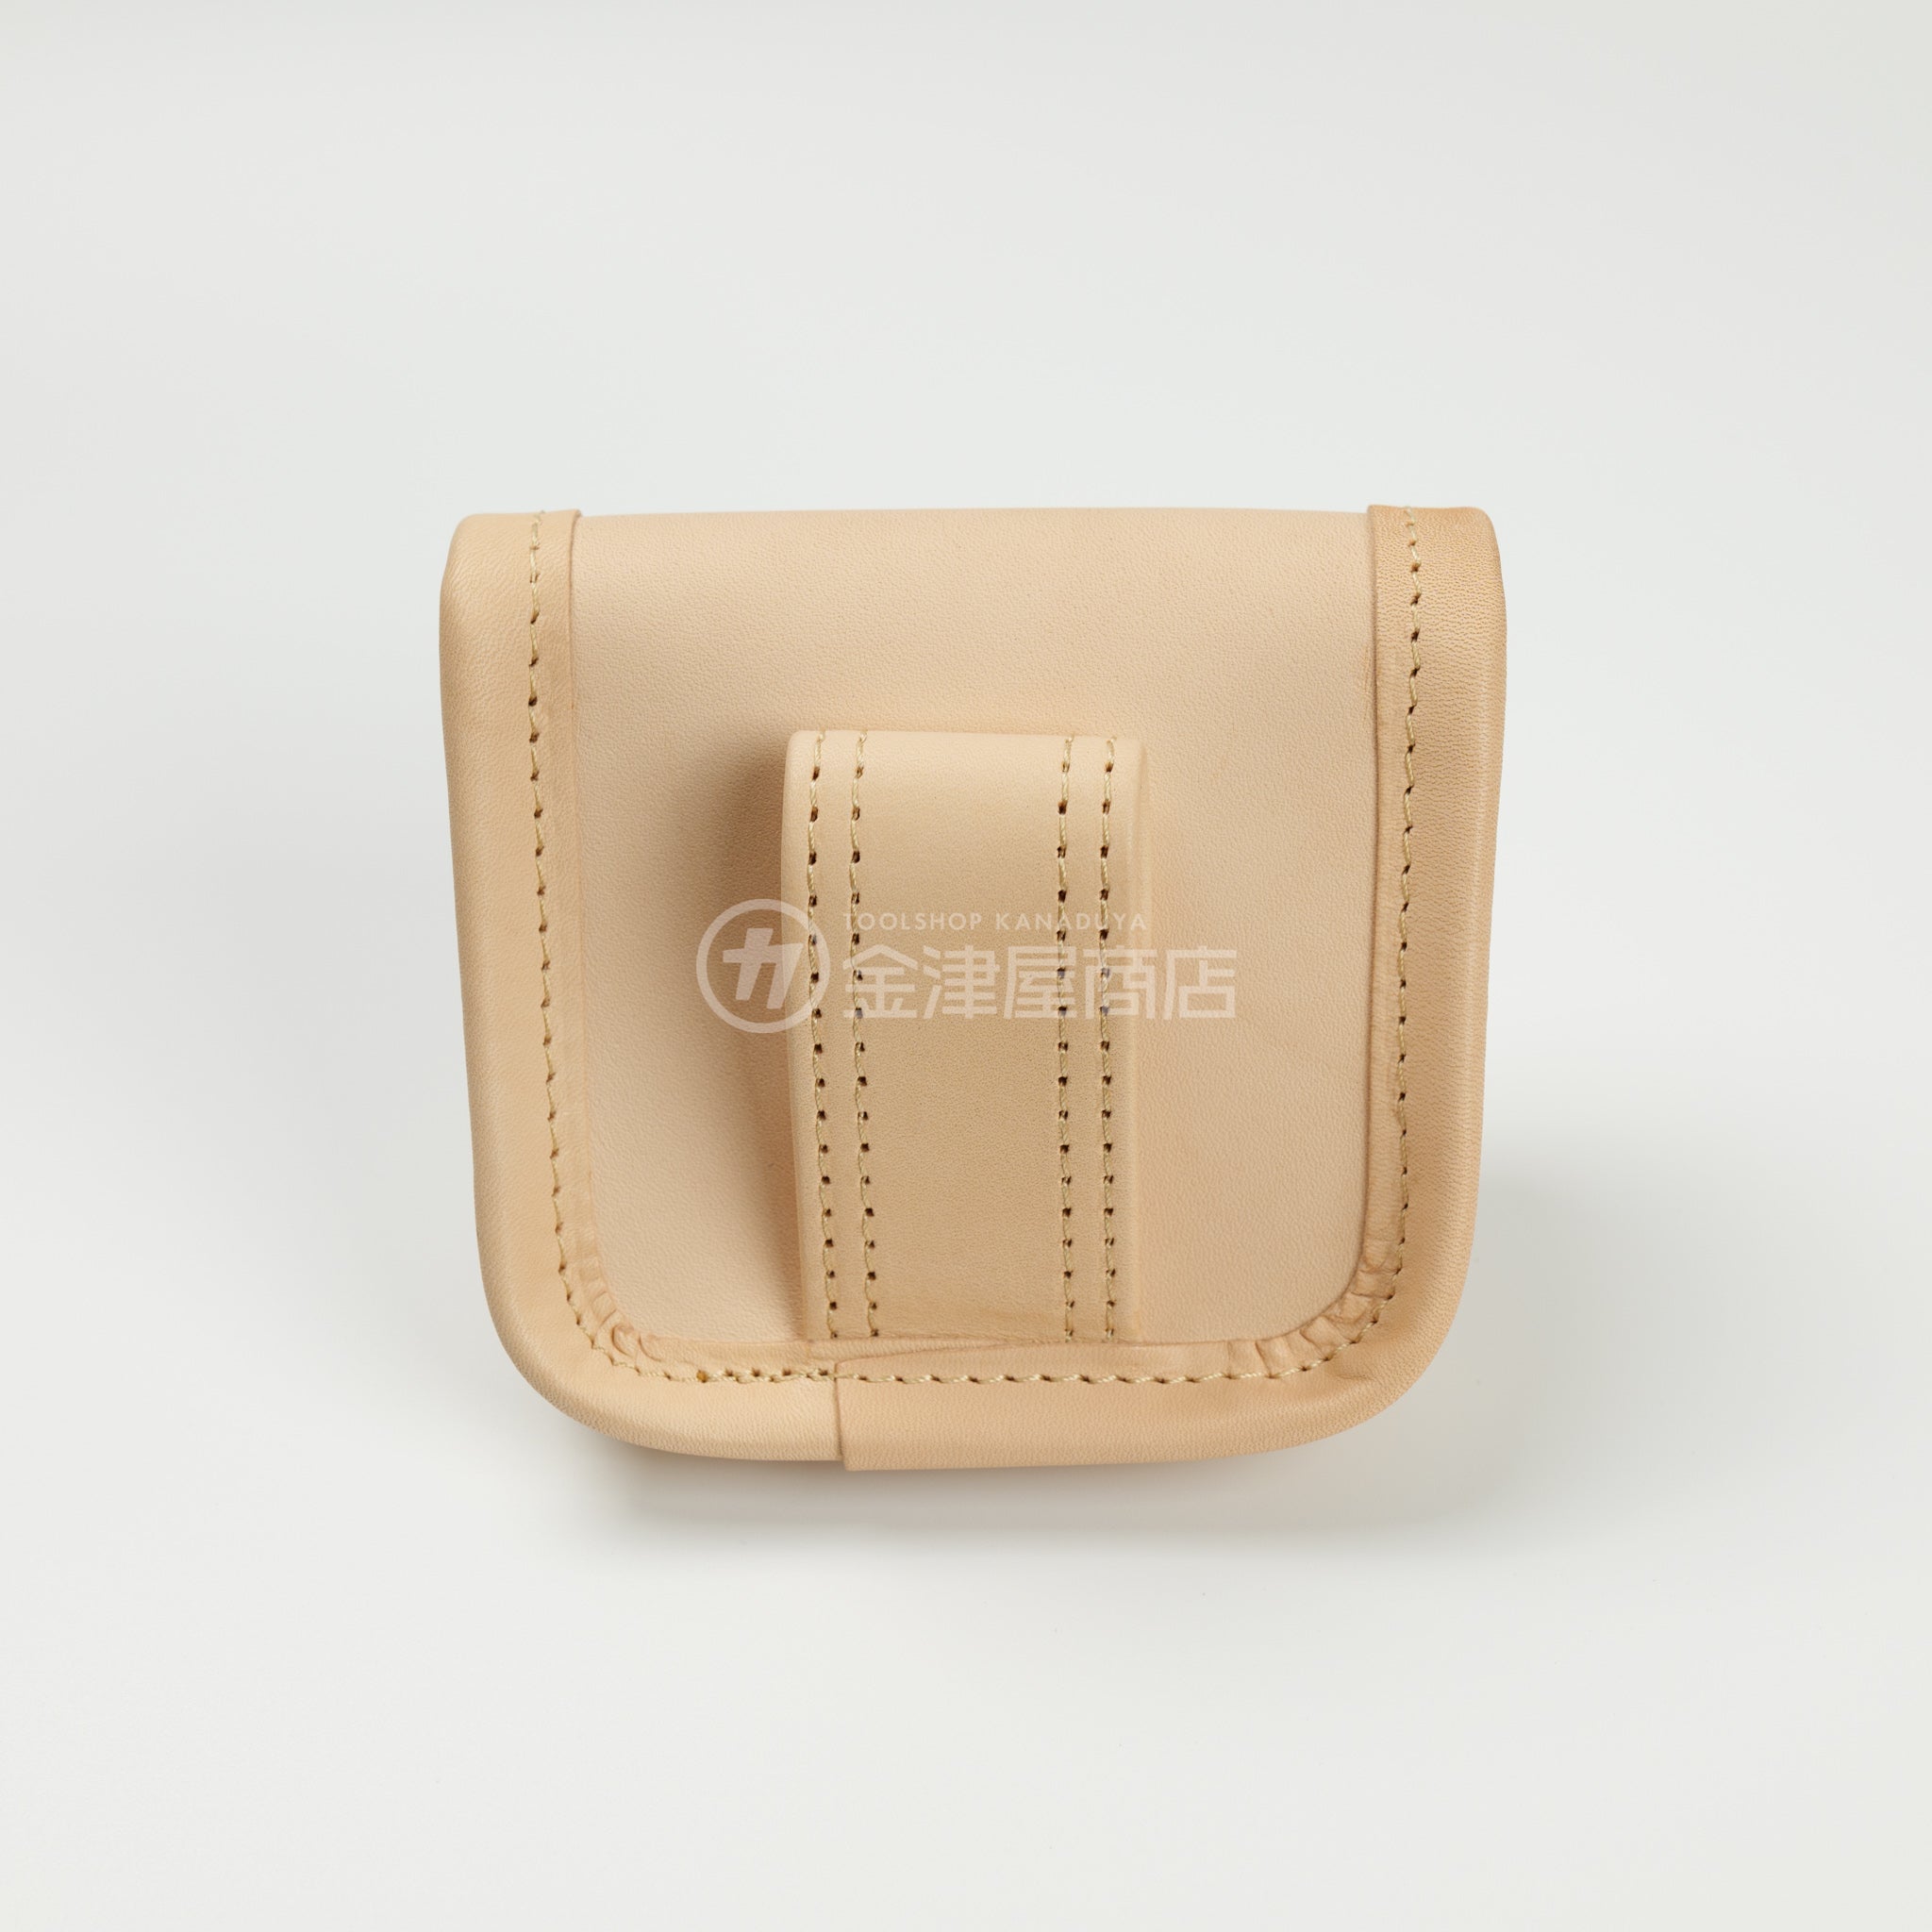 KNICKS Nume leather accessory pouch KNS-100BOX/KBS-100BOX